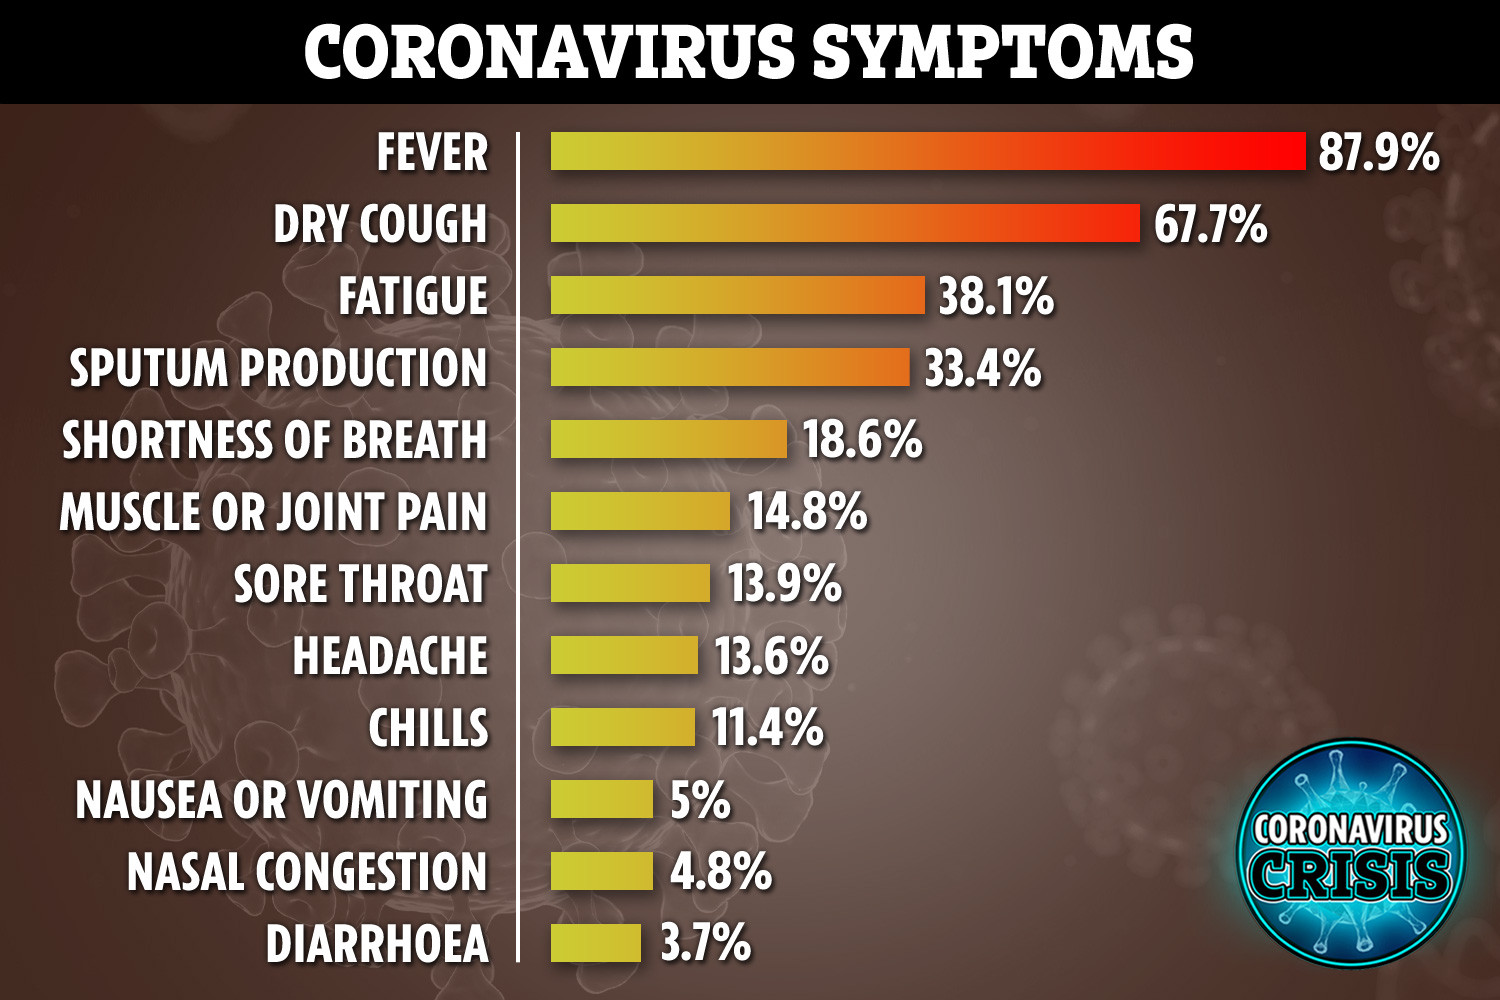  The most common signs of coronavirus in confirmed cases of Covid-19 from China up to February 22, 2020